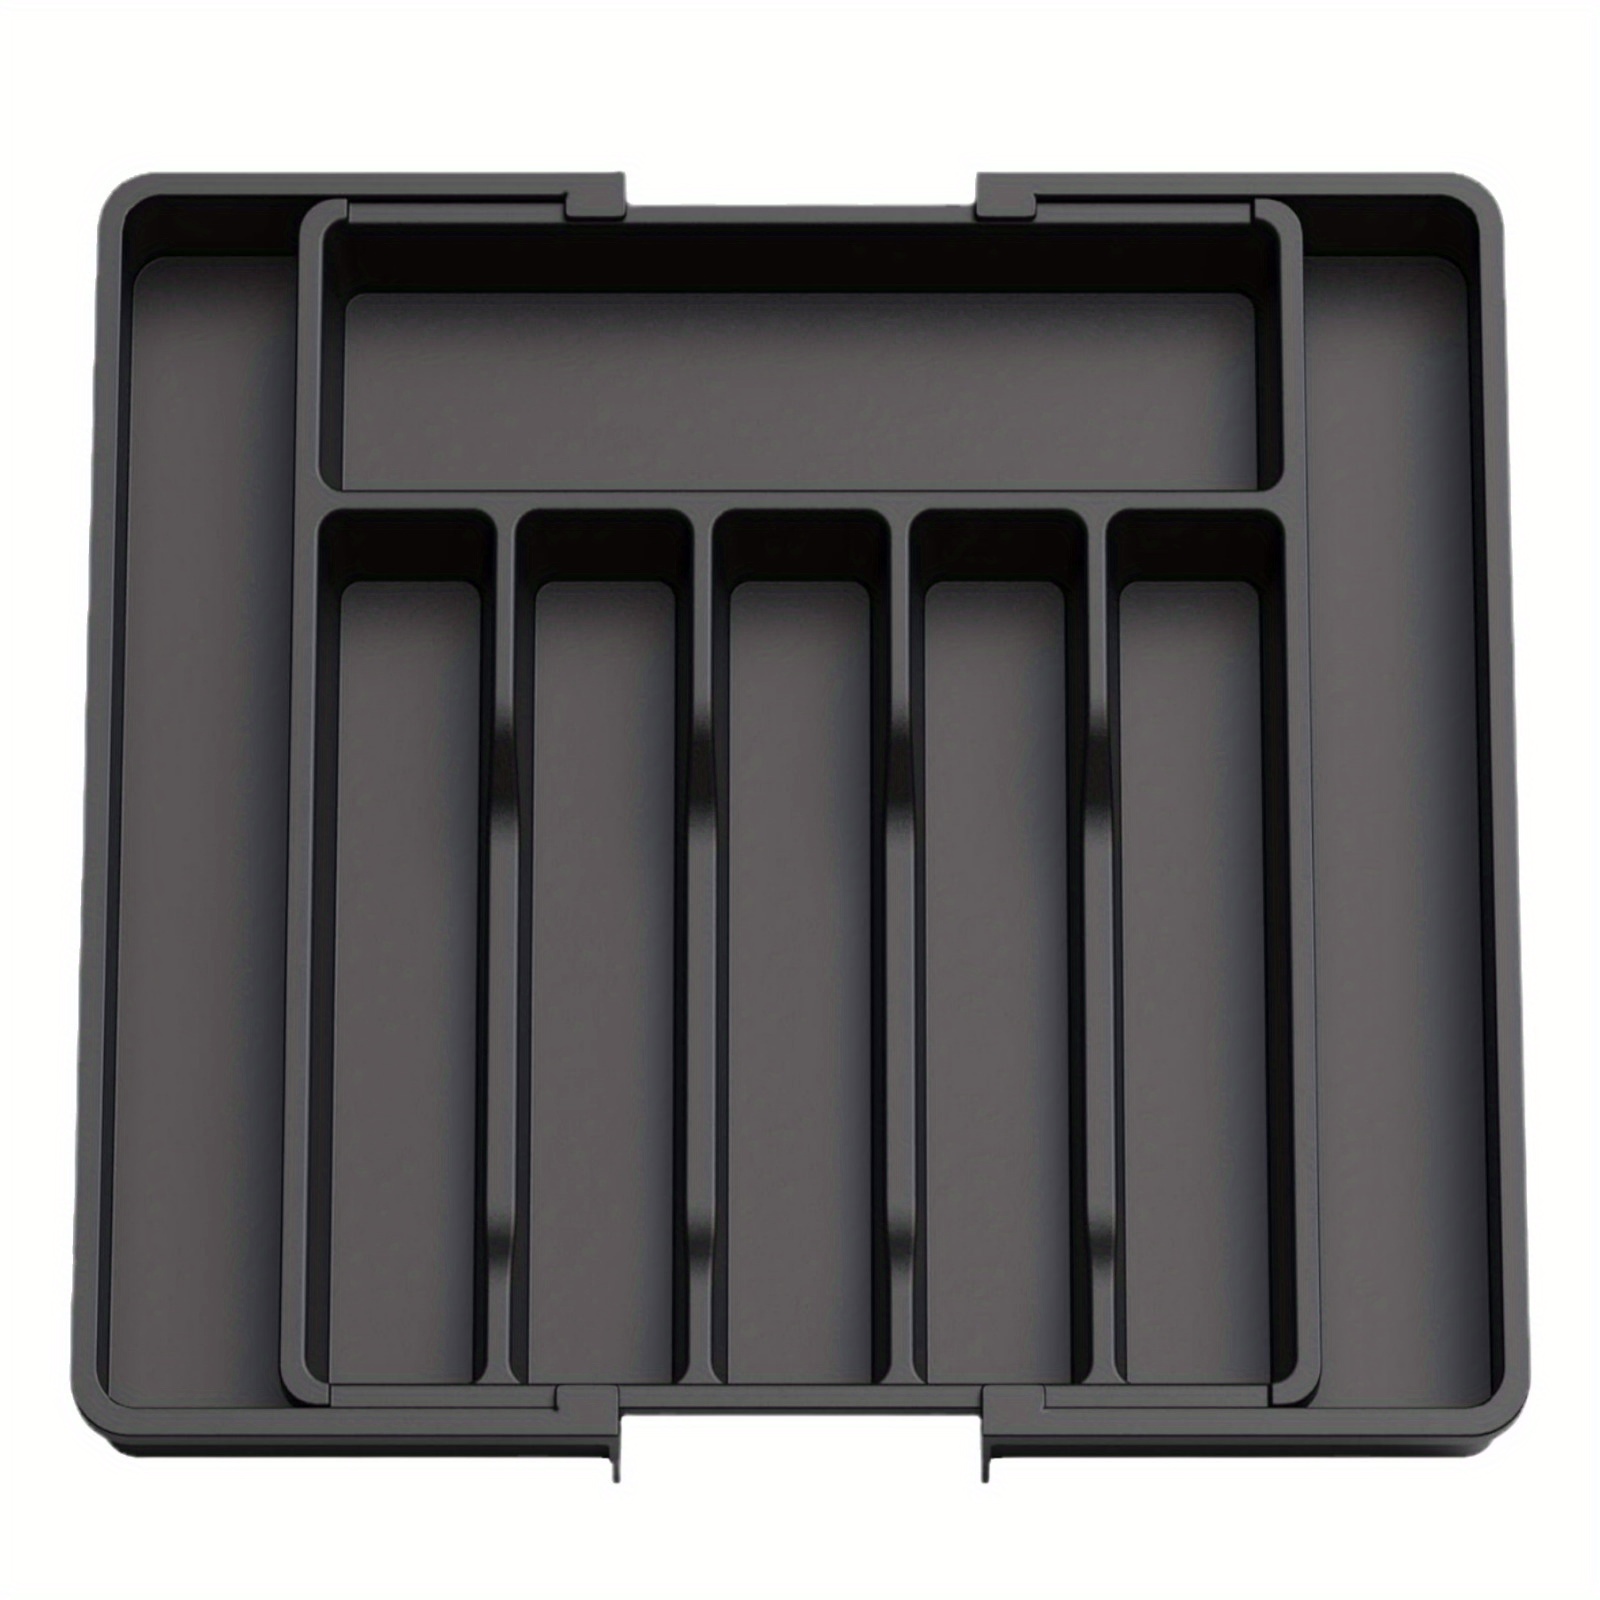 

Expandable Kitchen Drawer Organizer, Adjustable Flatware And Utensil Tray, Bpa-free Plastic Silverware Storage With Knife Rest, Home Use Cutlery Holder - Black